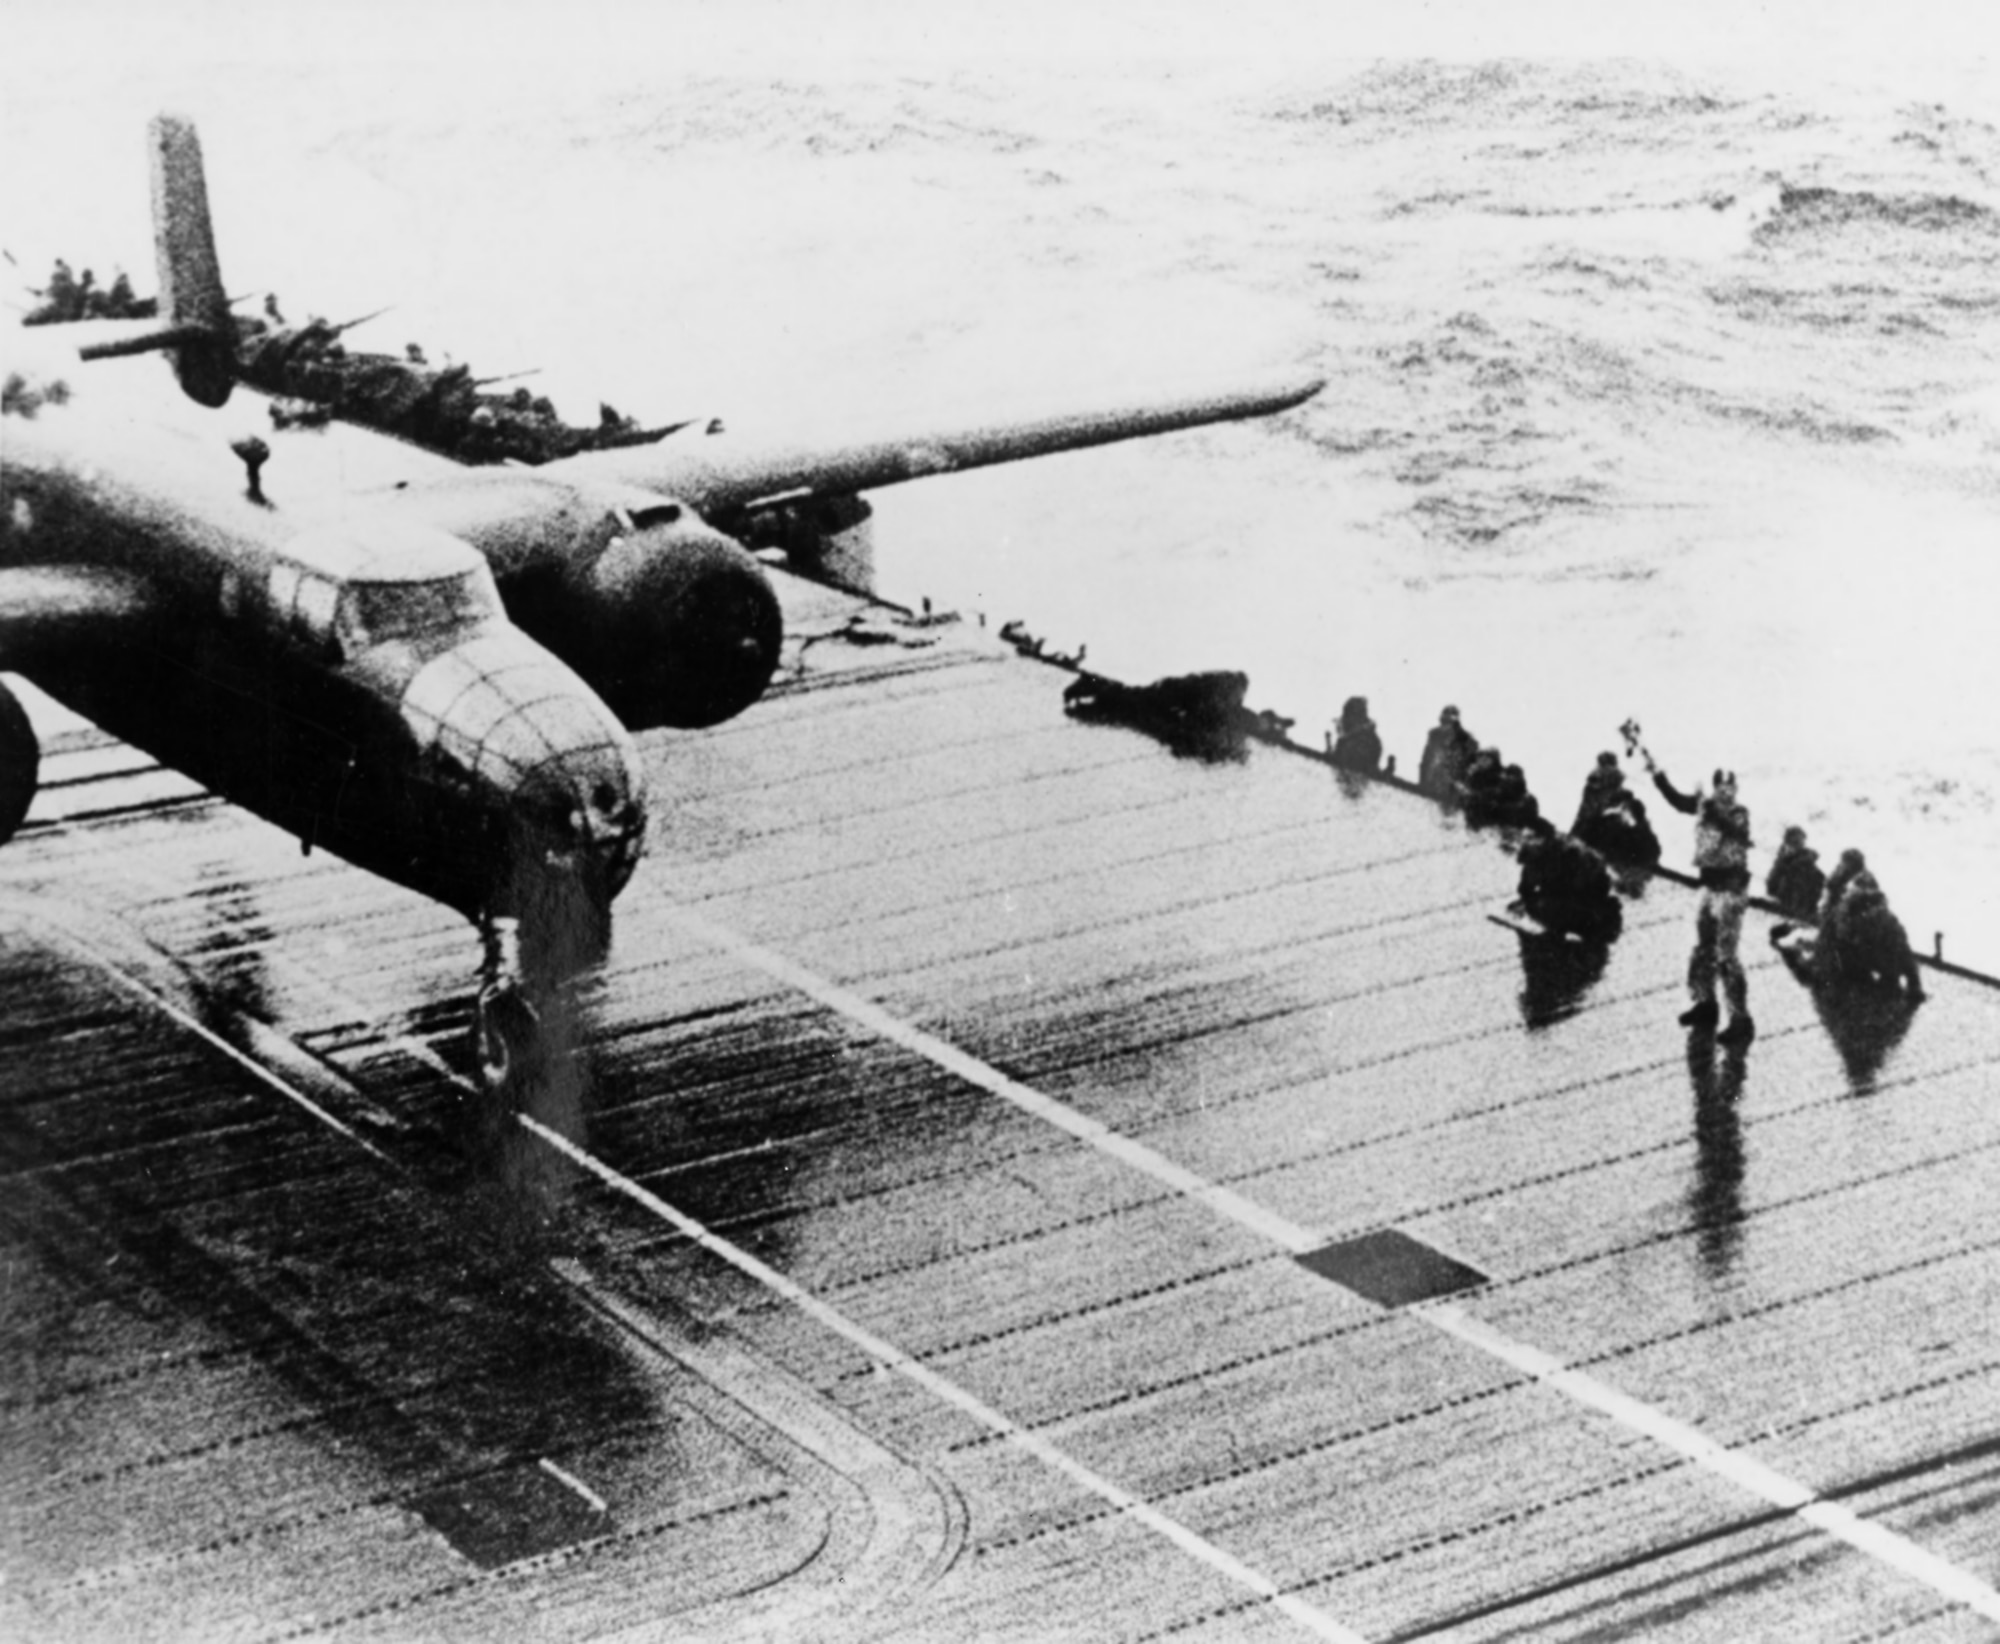 A B-25 begins its take off roll from the deck of the USS Hornet for the "Doolittle Raid" on Tokyo, Saturday, April 18, 1942. The bombing attack by the United States of America on the Japanese capital Tokyo and other places on the island of Honshu during World War II, was the first air raid to strike the Japanese Home Islands. Sixteen B-25B Mitchell medium bombers were launched without fighter escort from the U.S. Navy aircraft carrier USS Hornet deep in the Western Pacific Ocean, each with a crew of five men. The plan called for them to bomb military targets in Japan, and to continue westward to land in China�landing a medium bomber on Hornet was impossible.